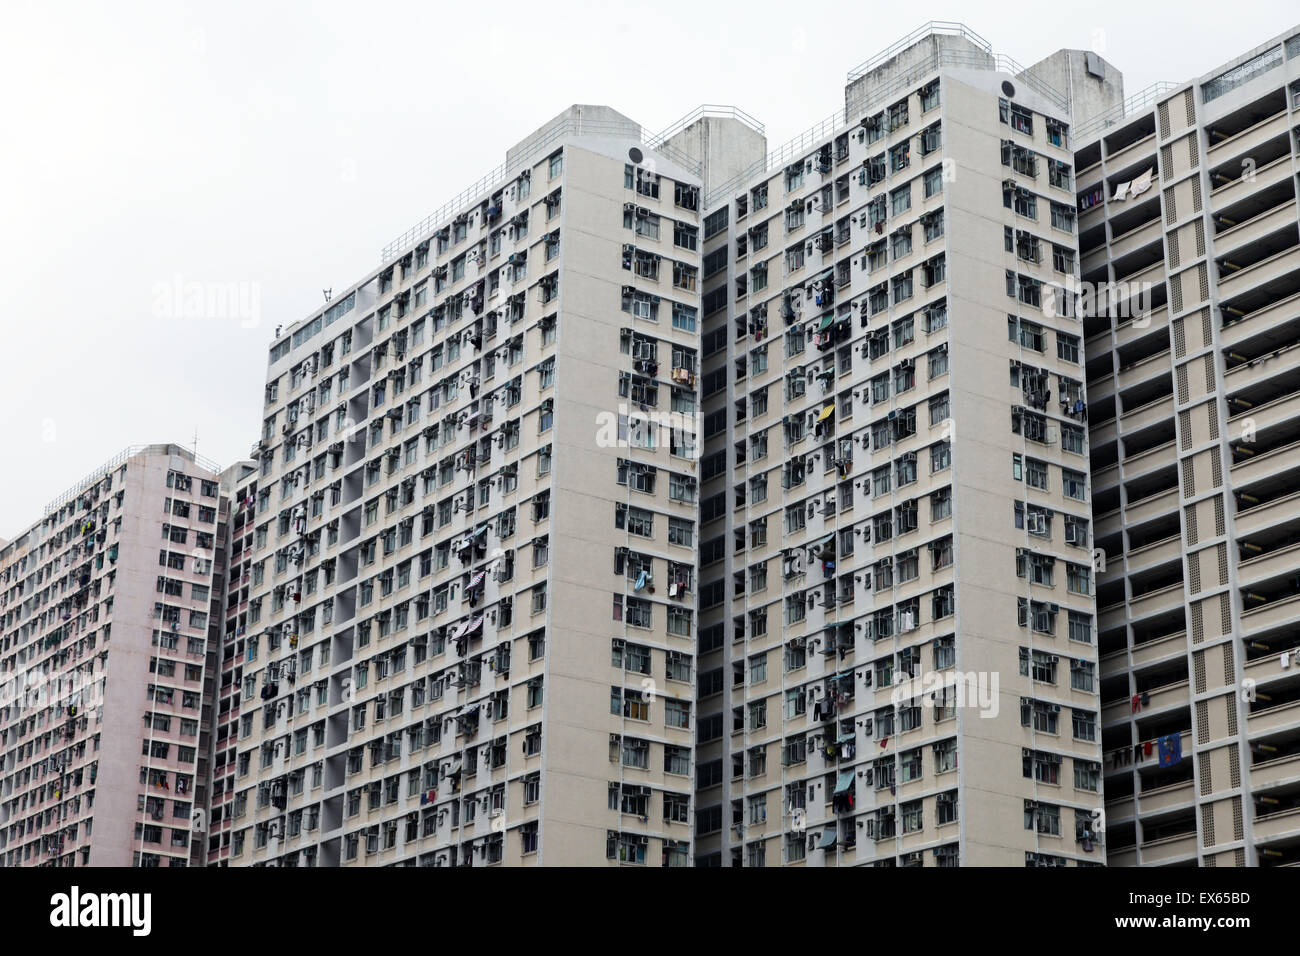 It's a photo of Hong Kong Towers for habitations for people to live in. It's council flats Stock Photo